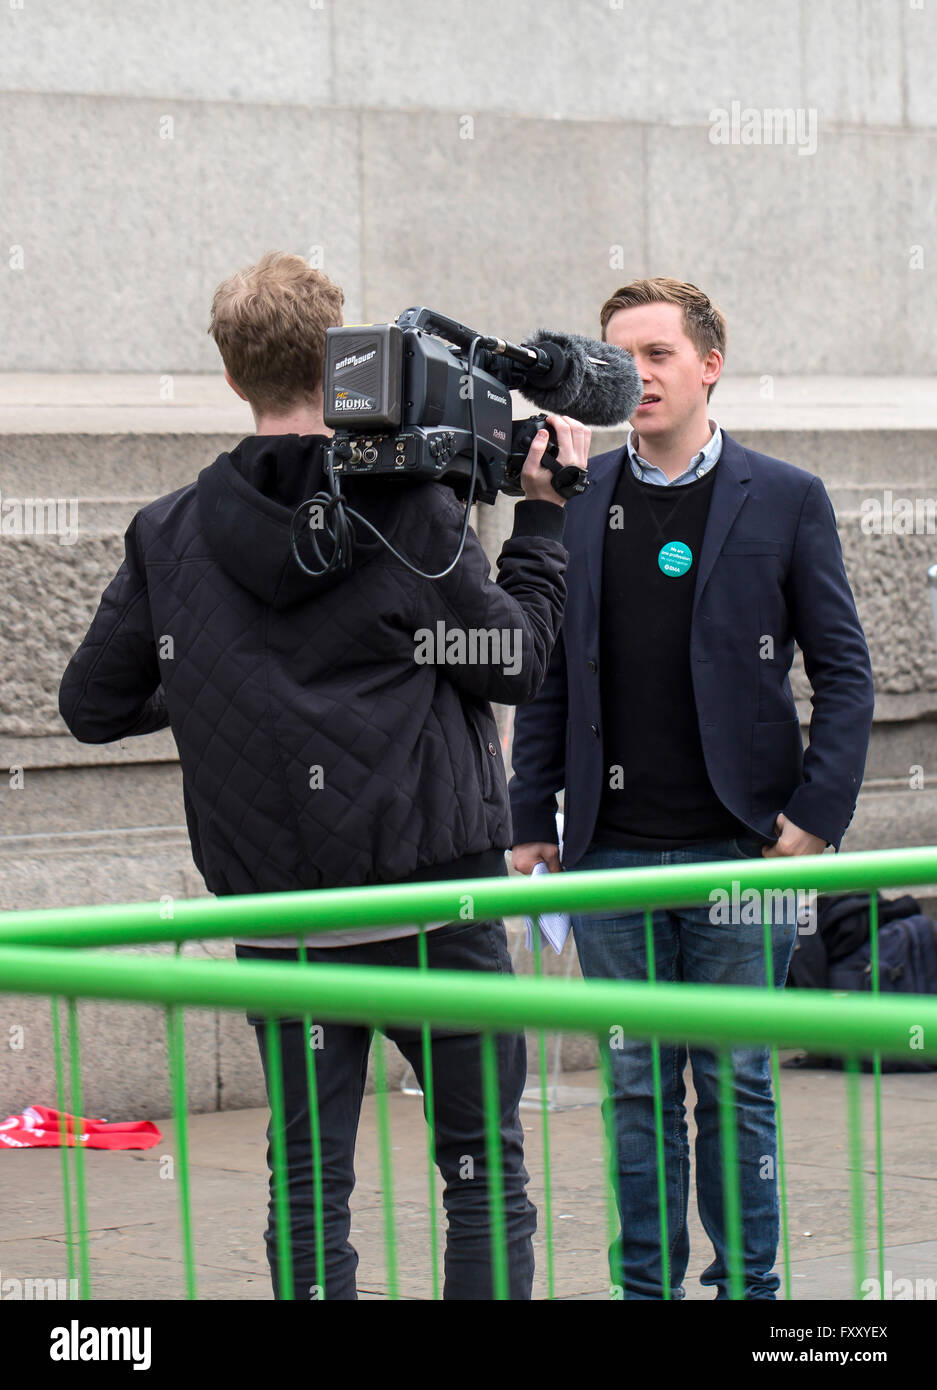 Owen Jones, one of the speakers at the anti-austerity rally is interviewed by the media. Stock Photo